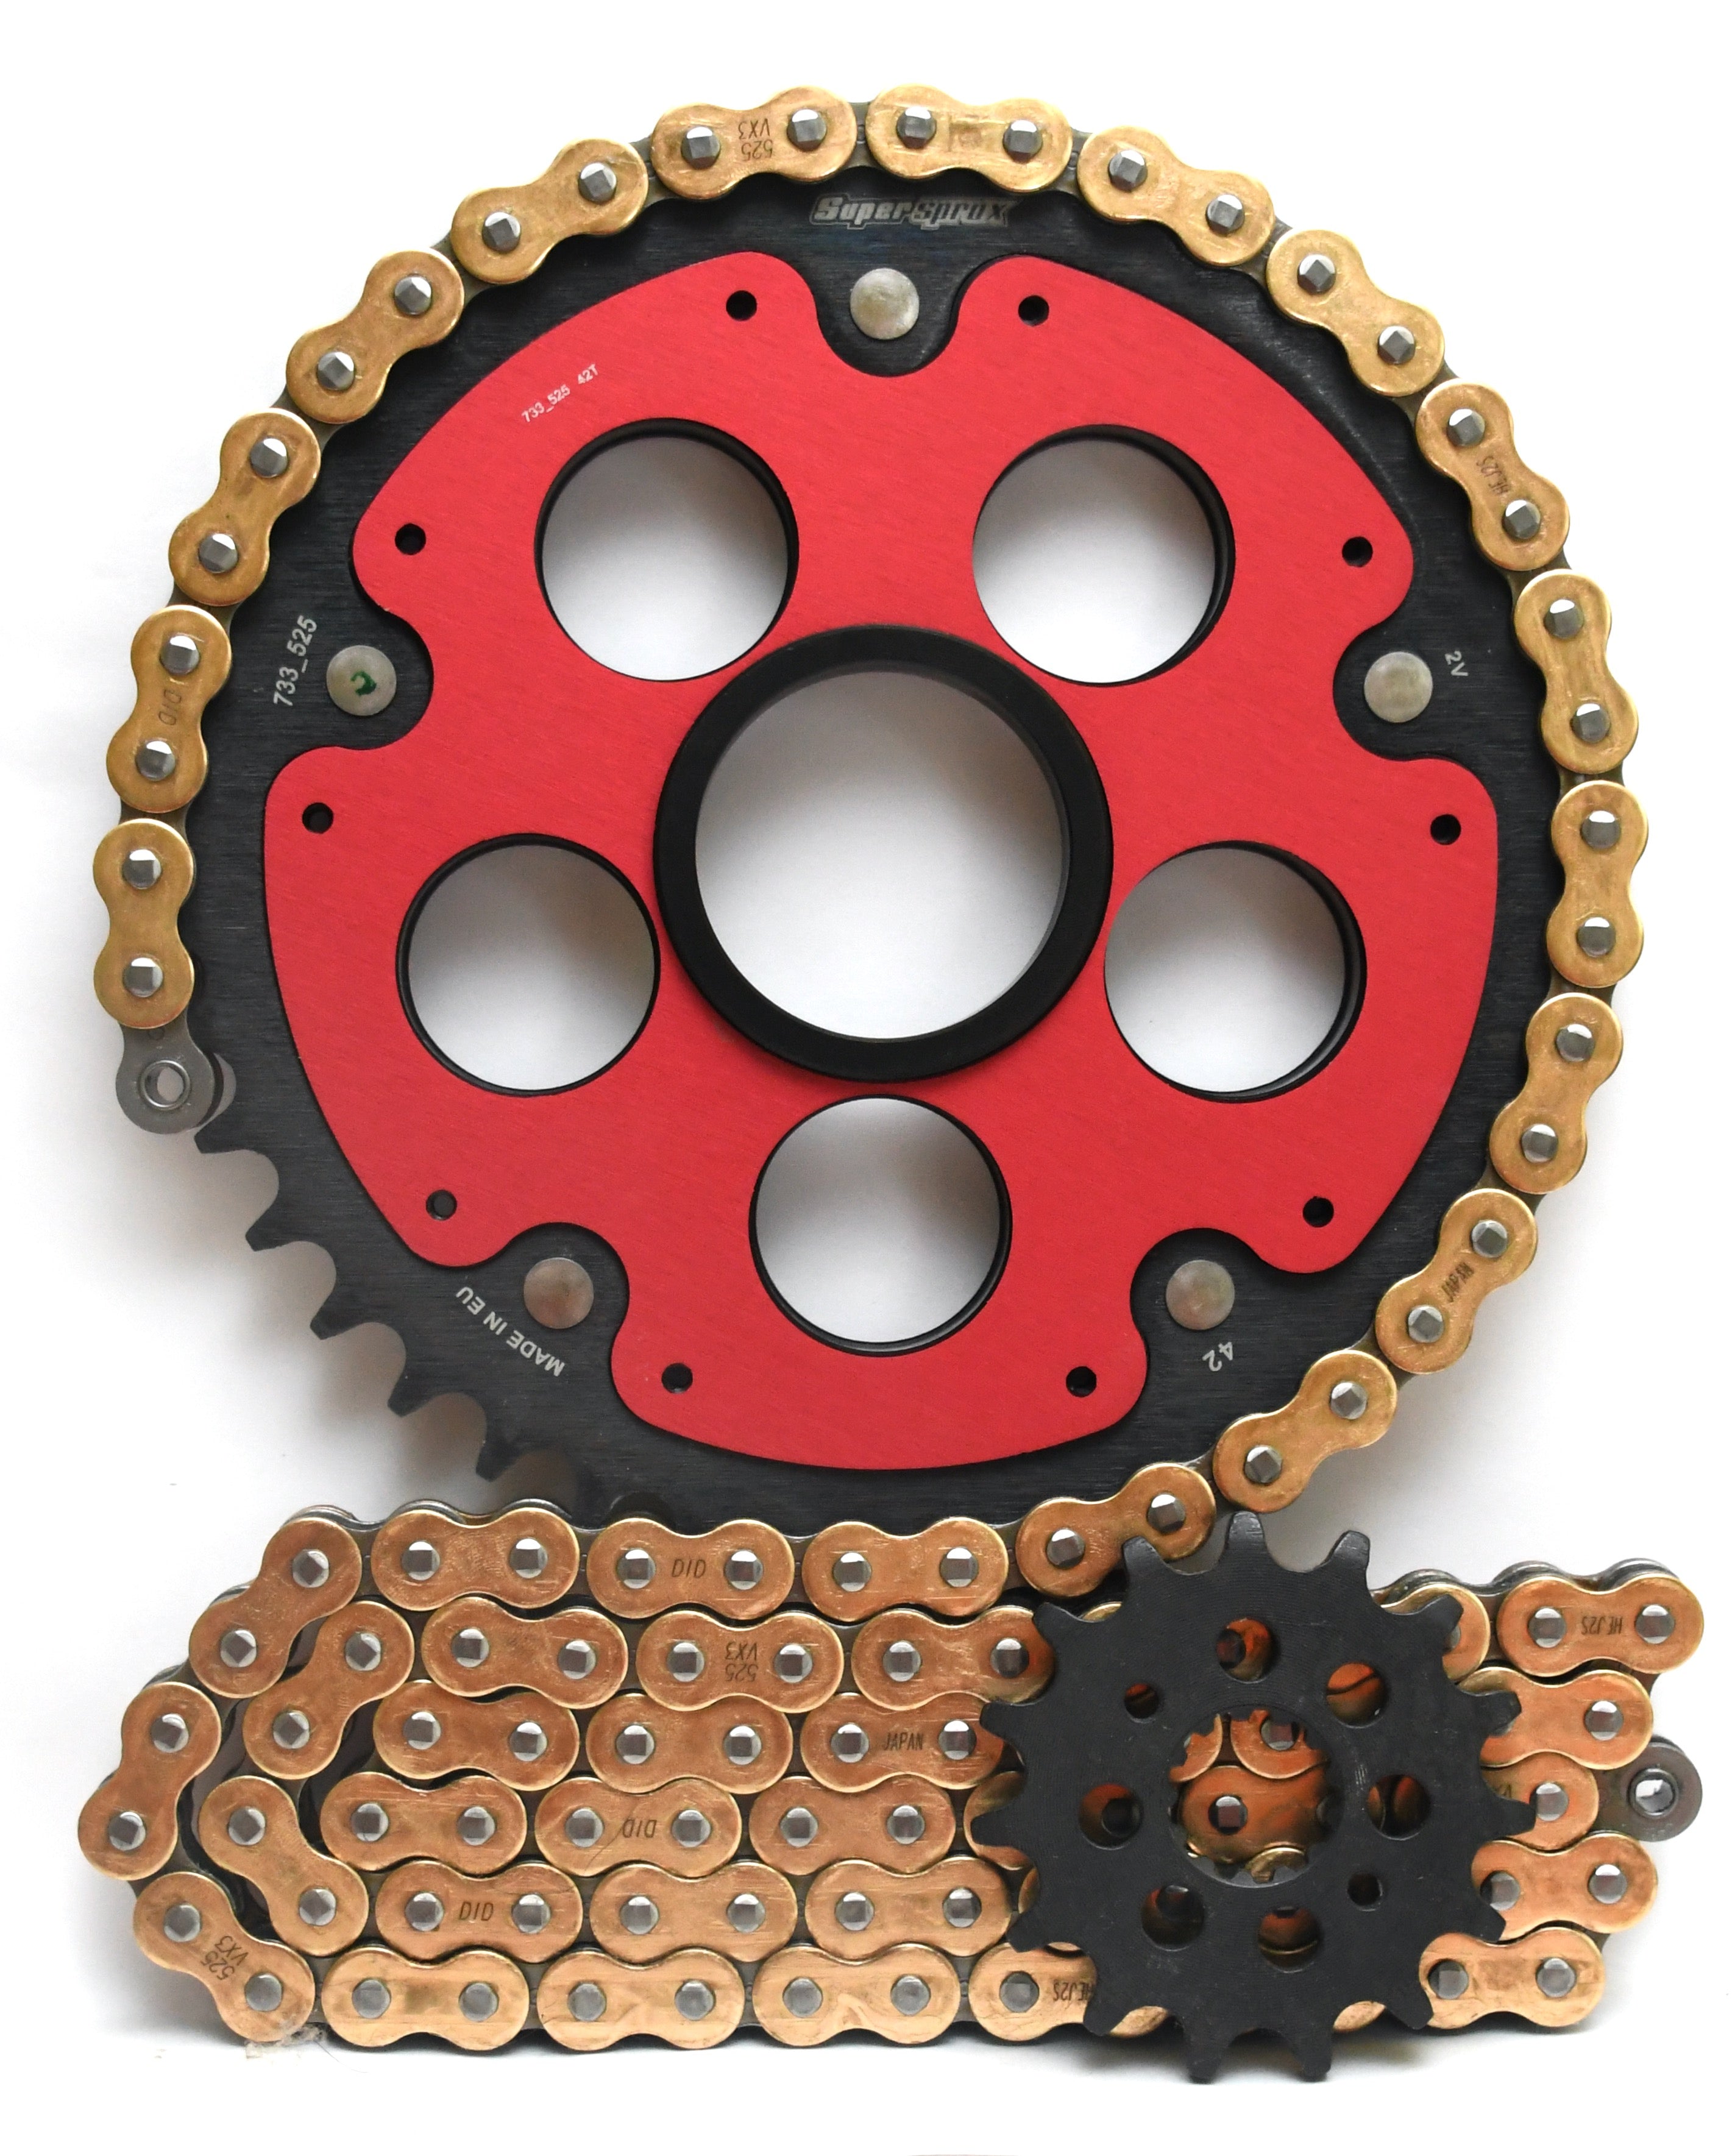 Supersprox Chain & Sprocket Kit for Ducati 848 (Inc EVO) 2008-2013 - Standard Gearing